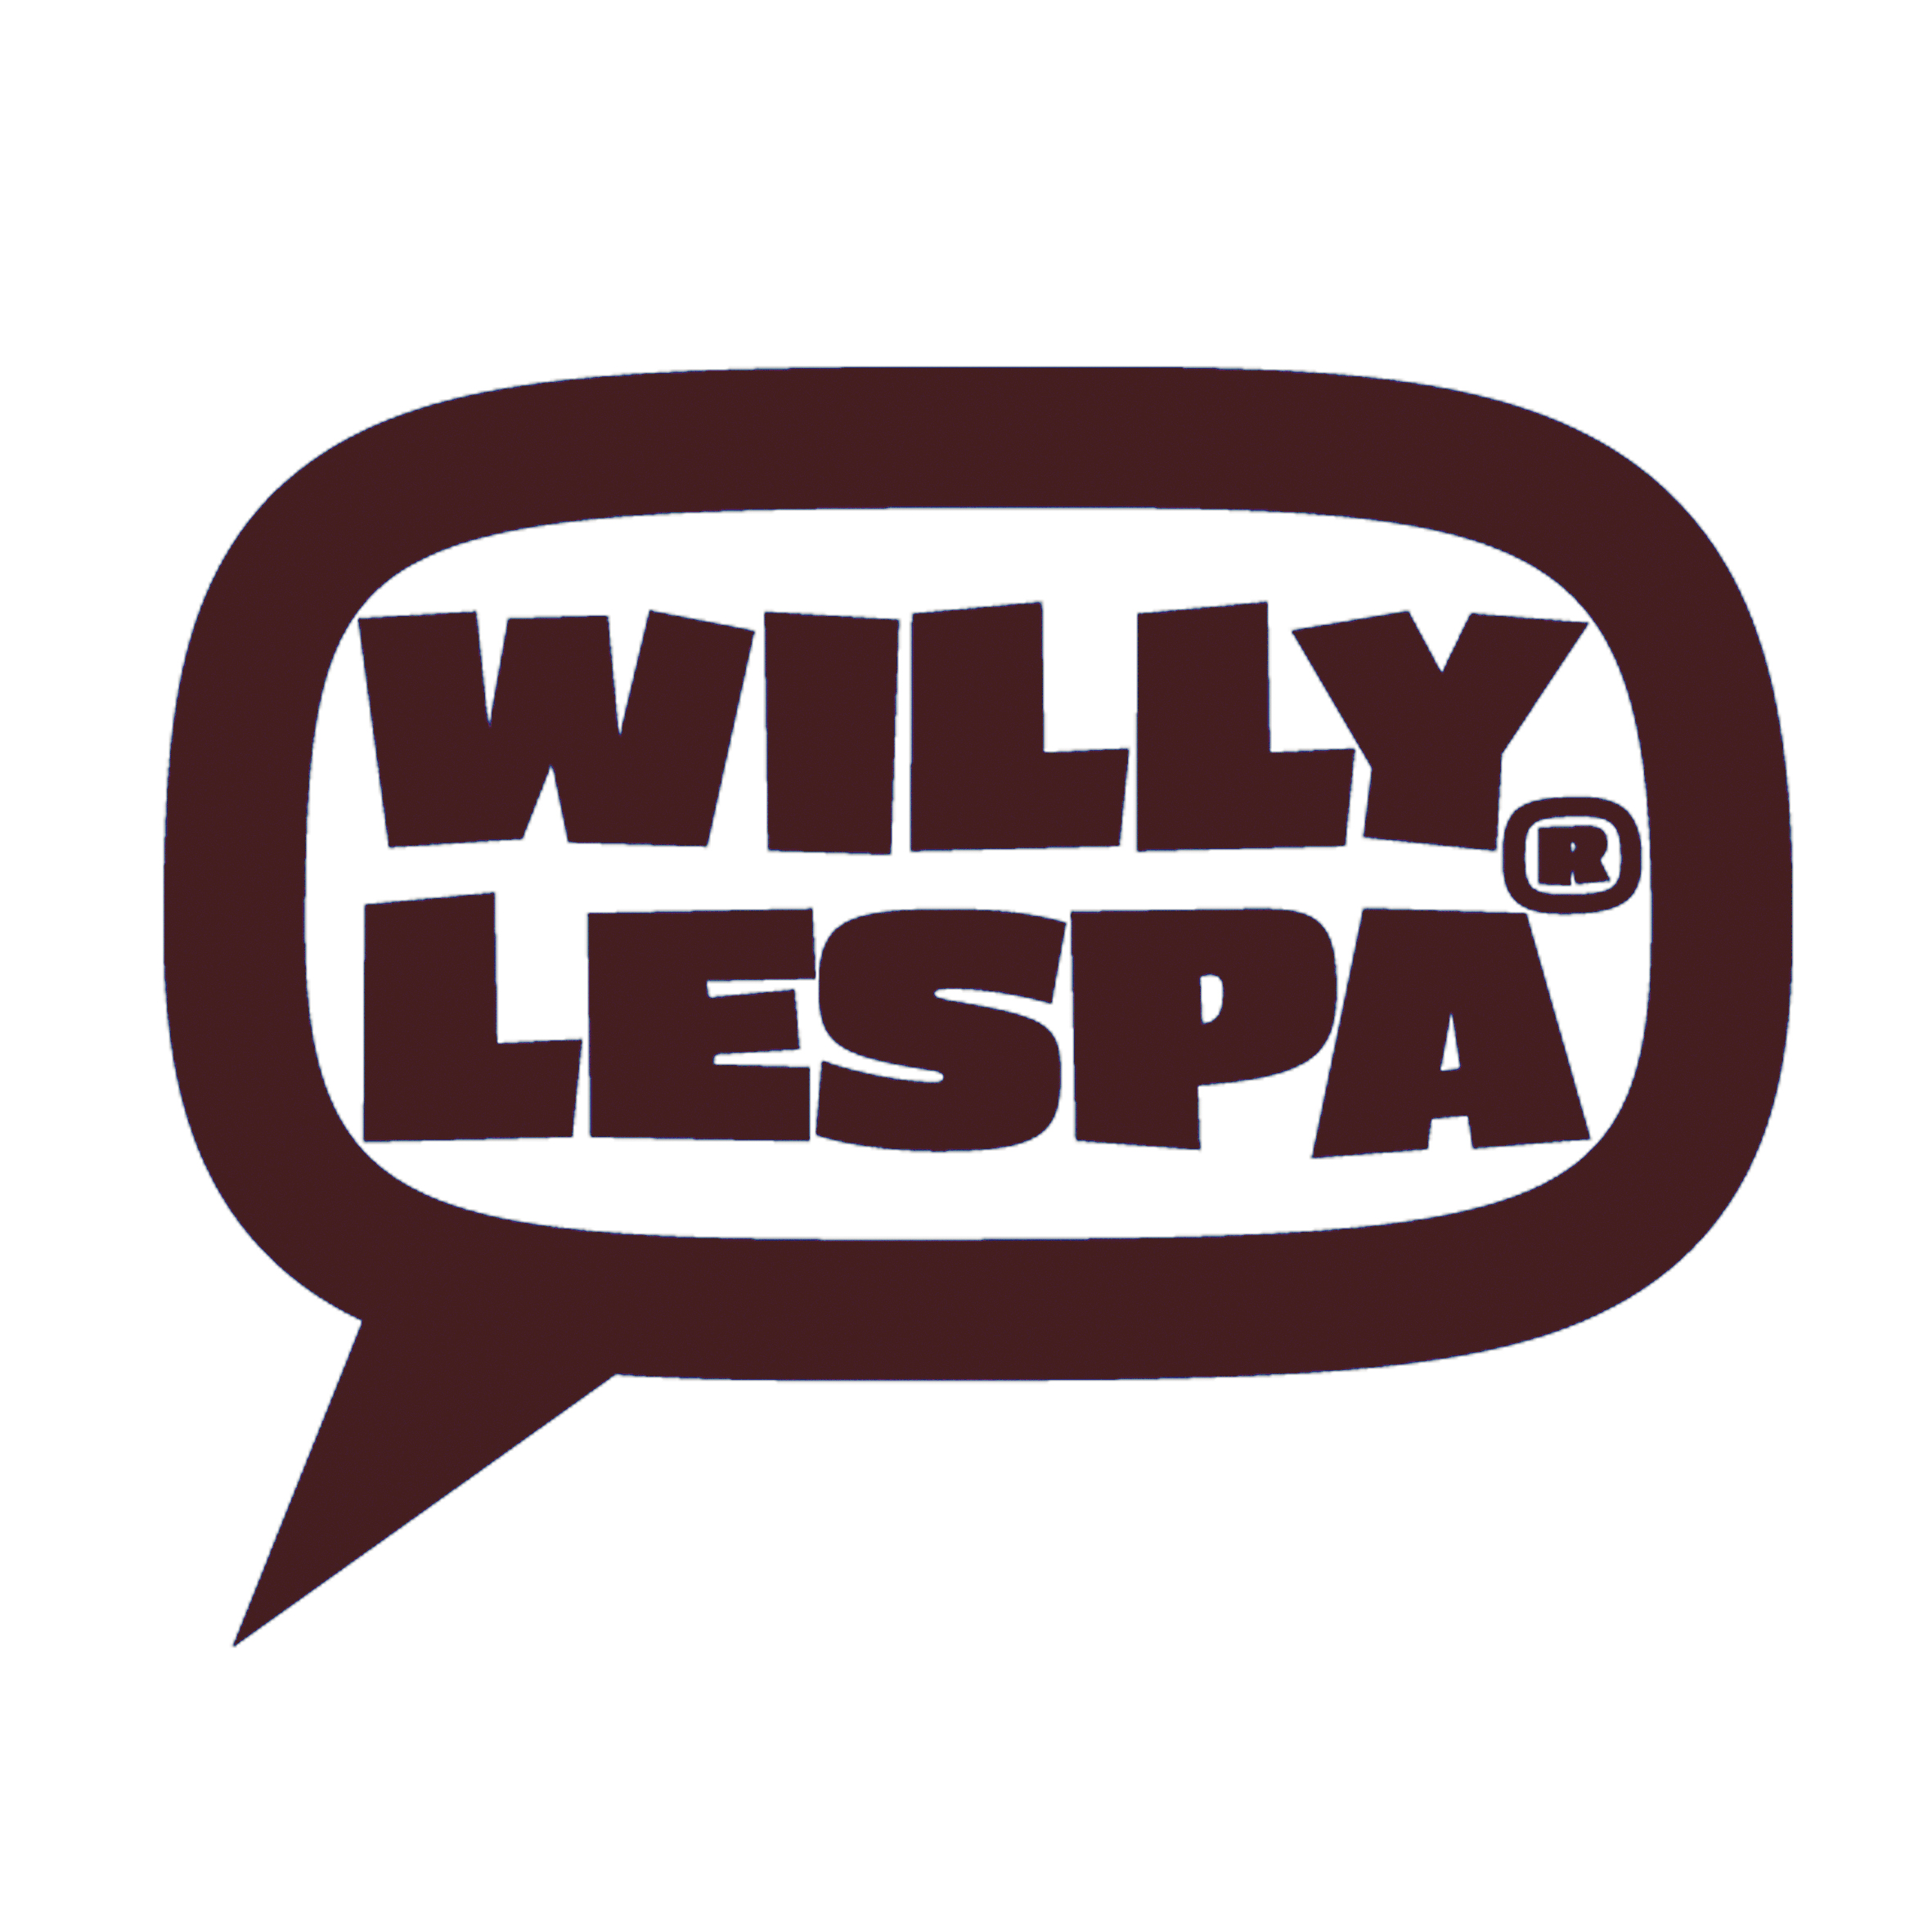 Willy Lespa